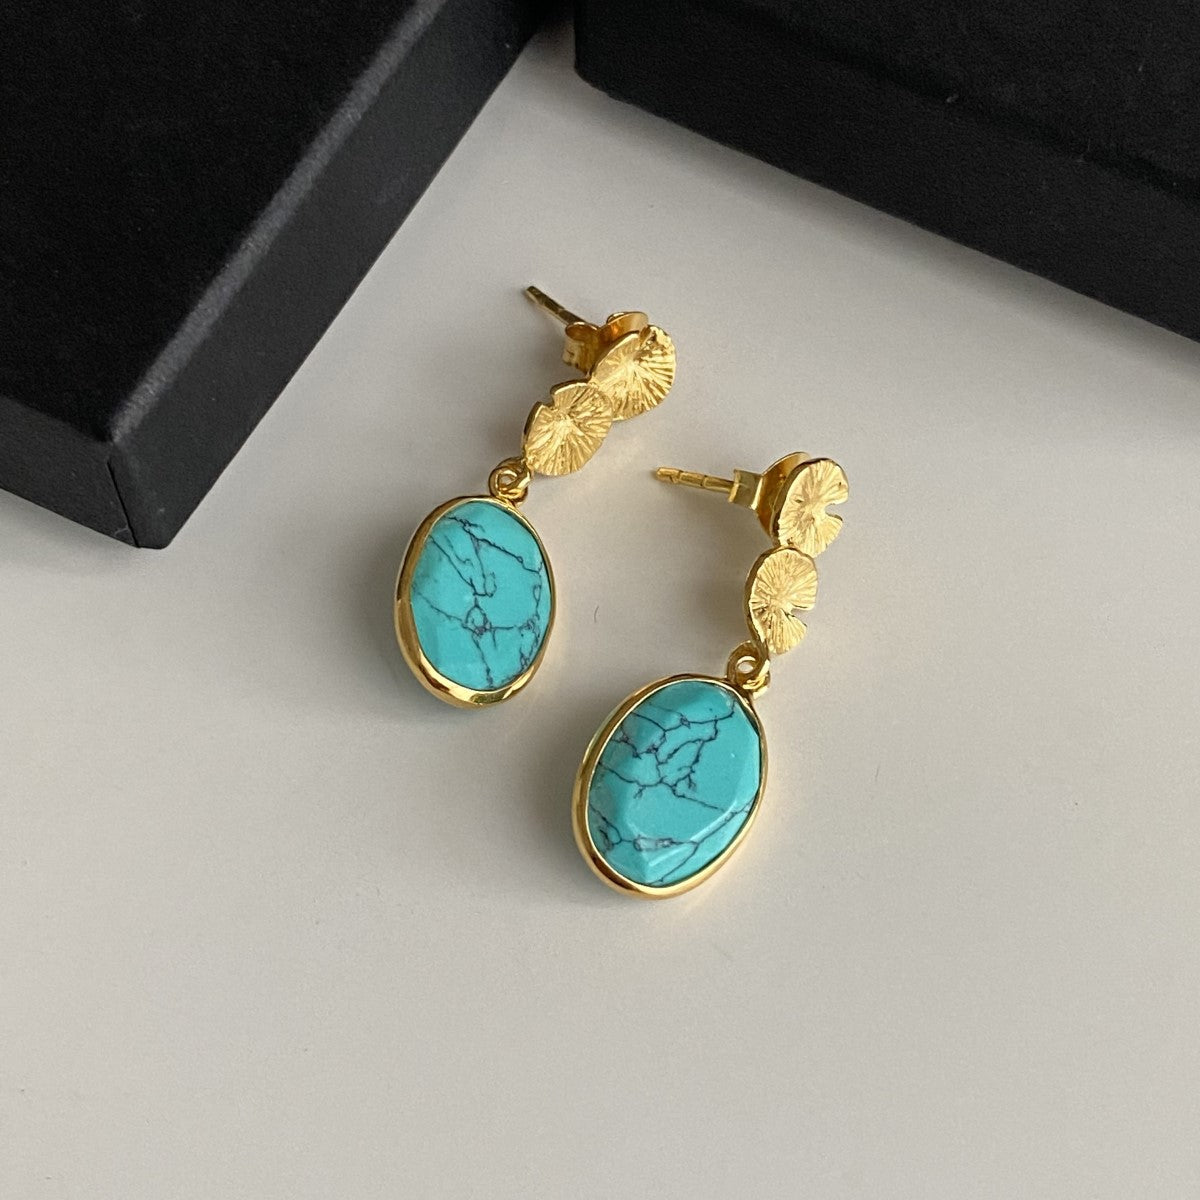 Lily Pad Earrings in Gold Plated Sterling Silver with a Turquoise Gemstone Drop